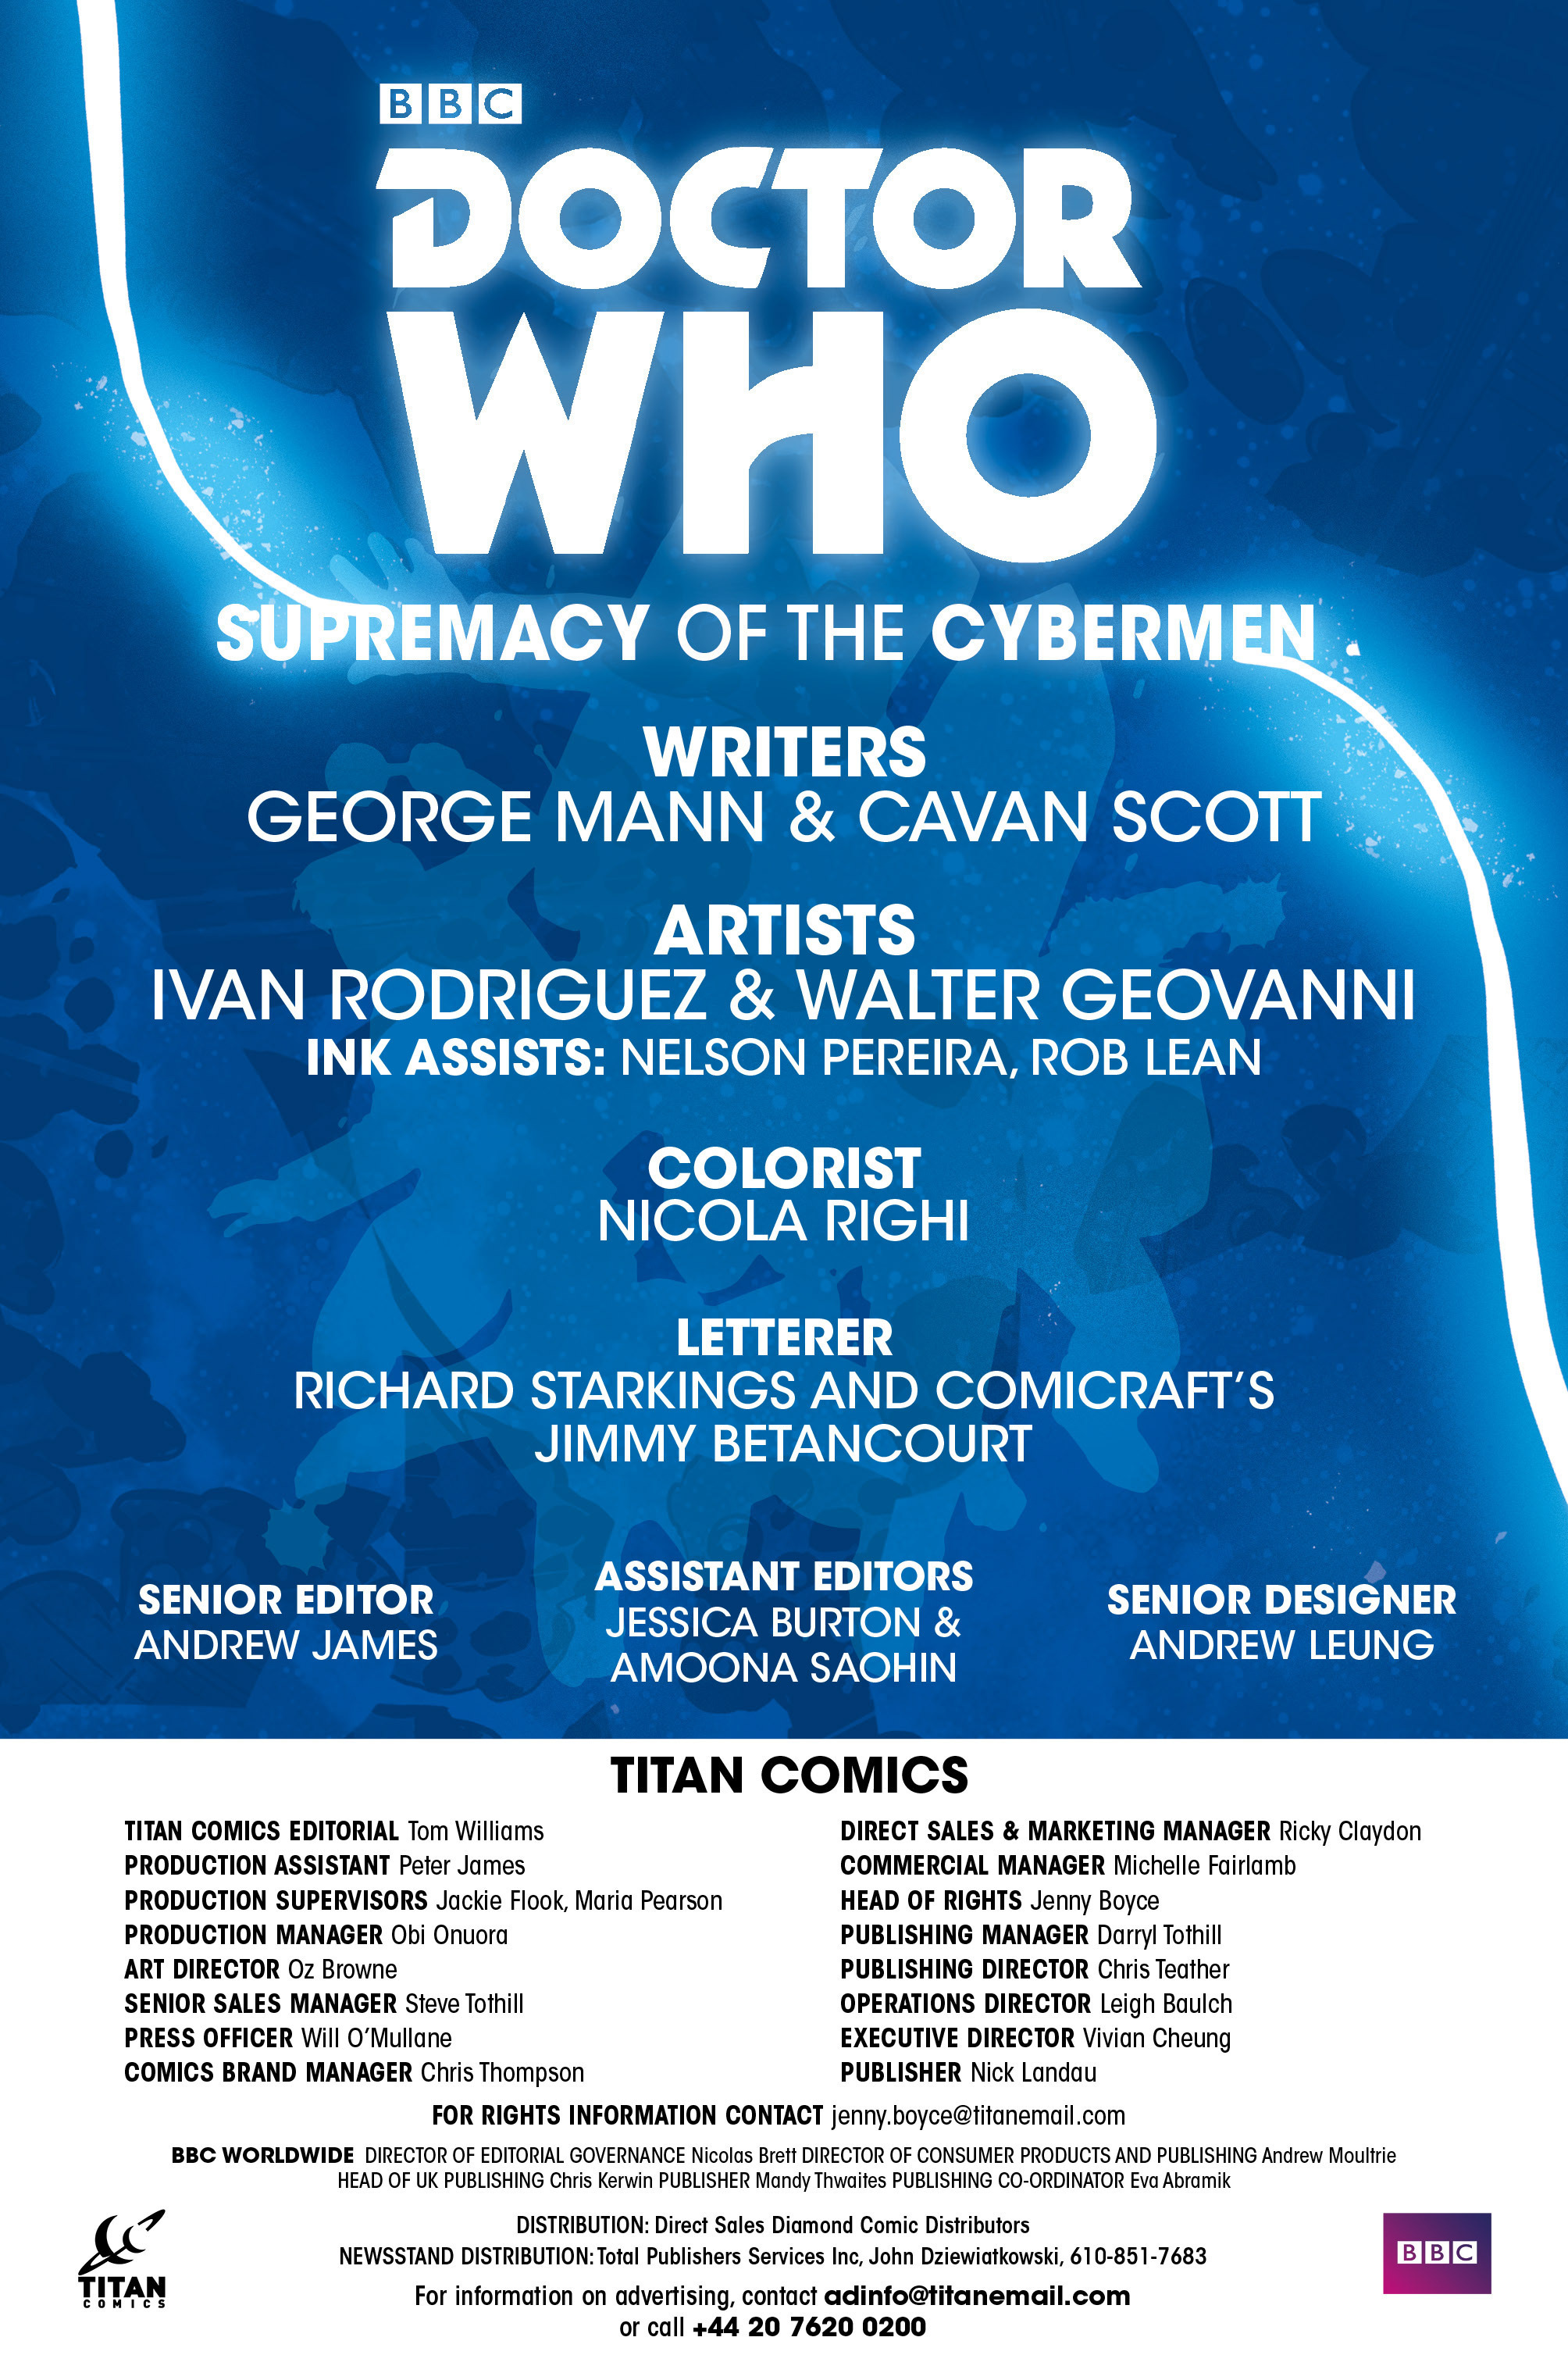 Read online Doctor Who Event 2016: Doctor Who Supremacy of the Cybermen comic -  Issue #4 - 6